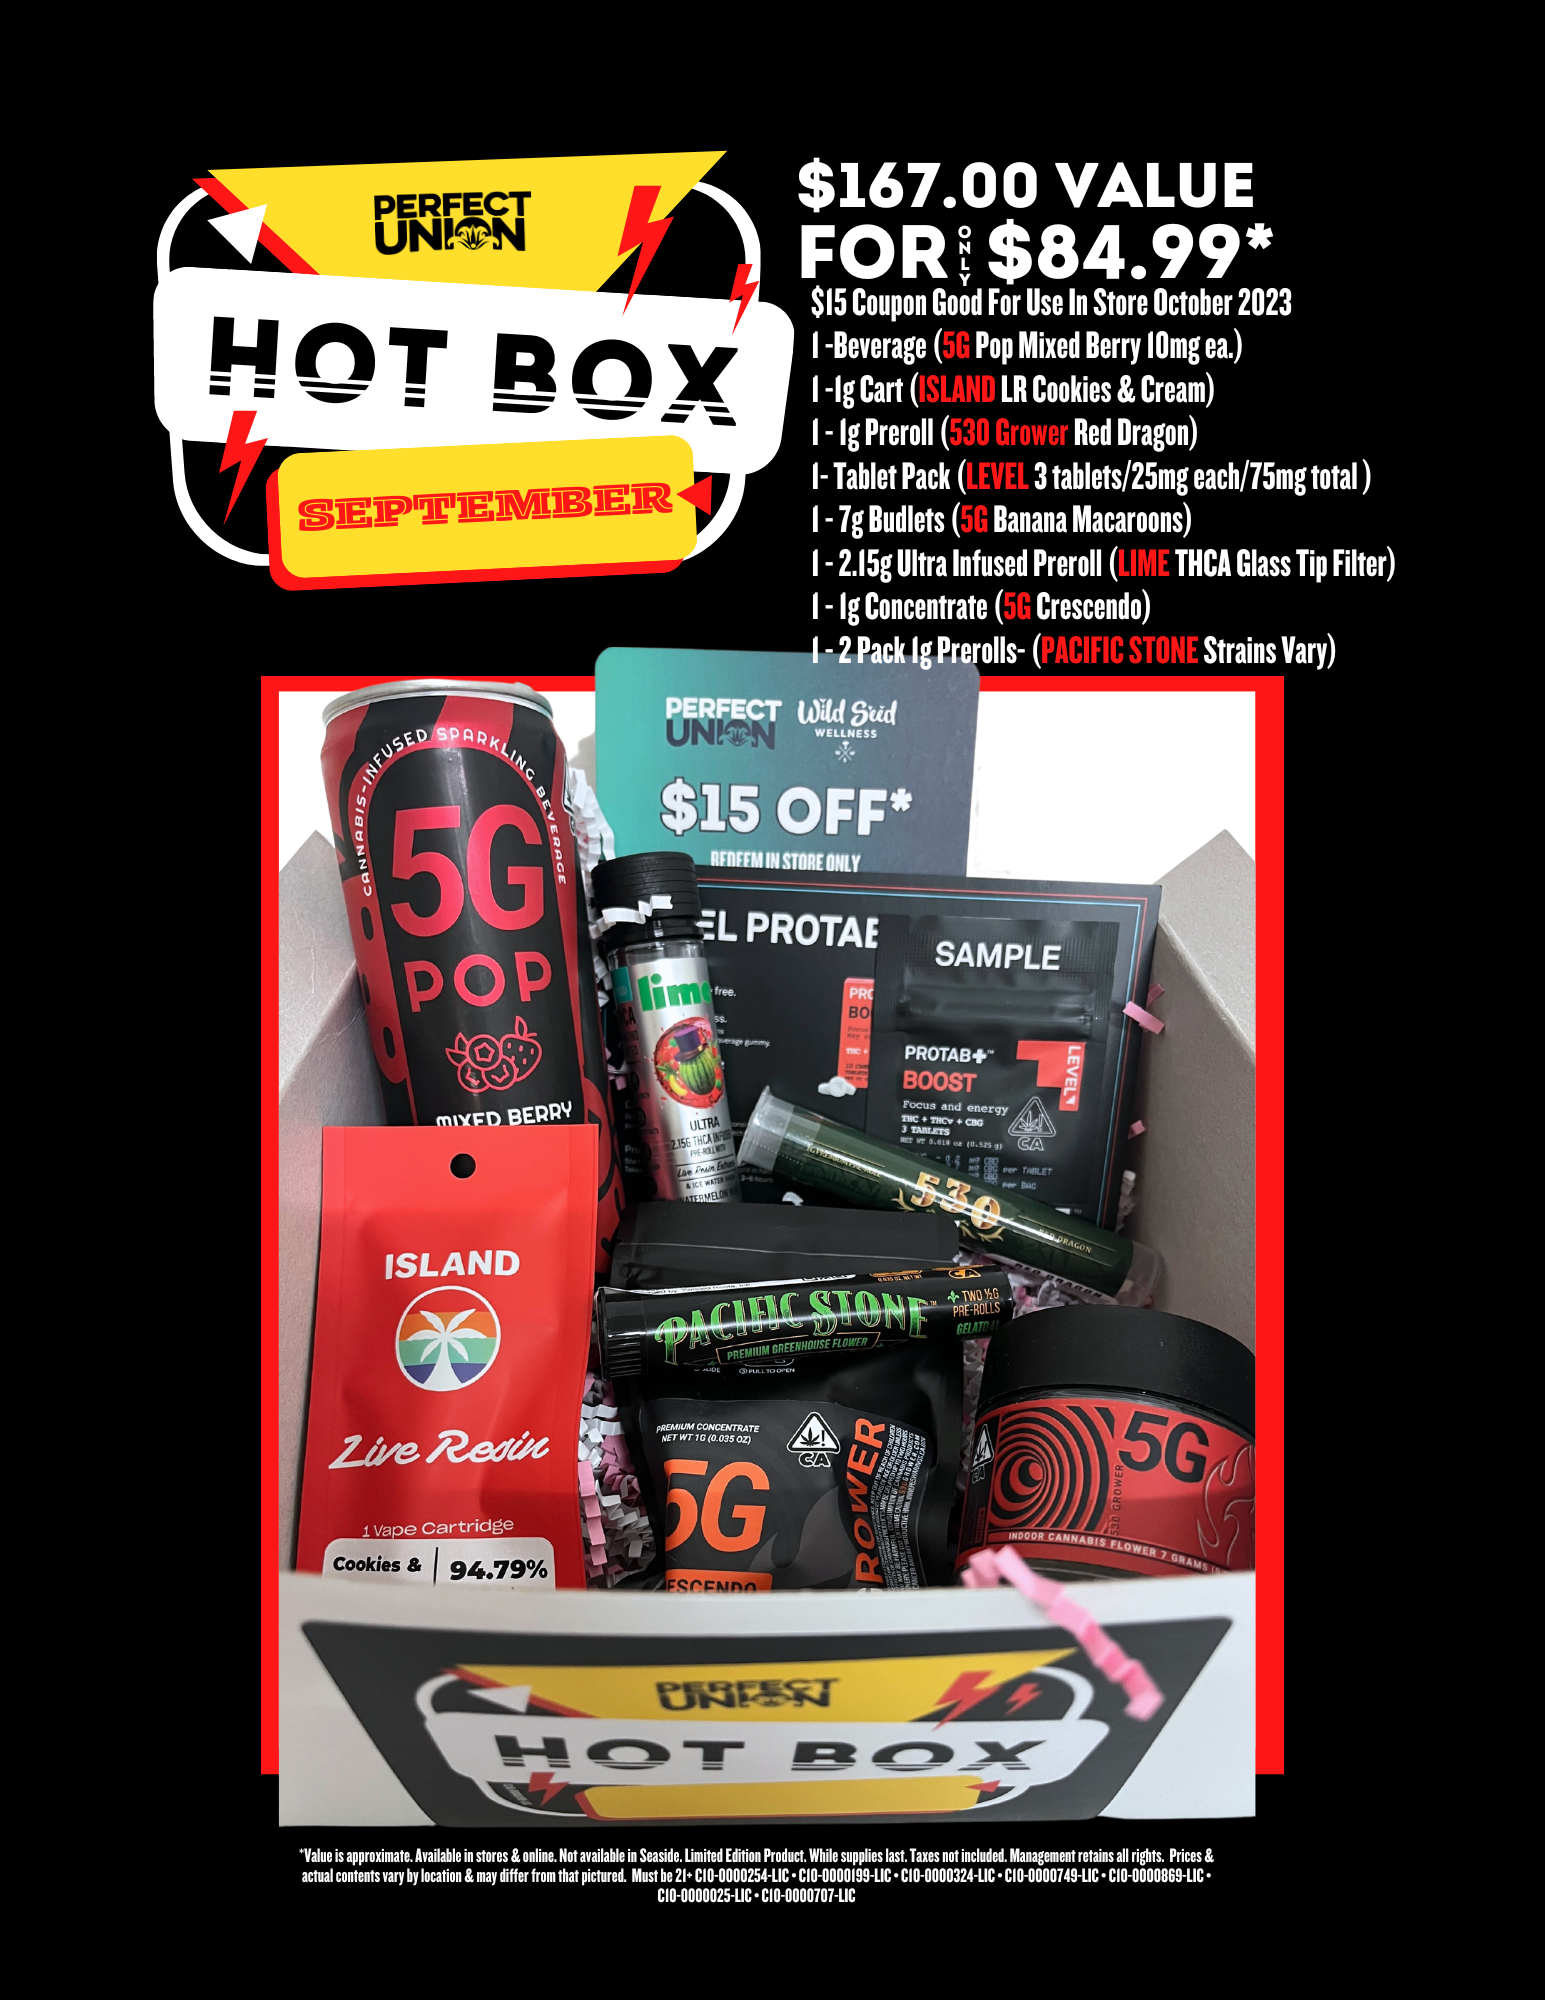 The September Hot Box from Perfect Union features multiple top cannabis brands in California.